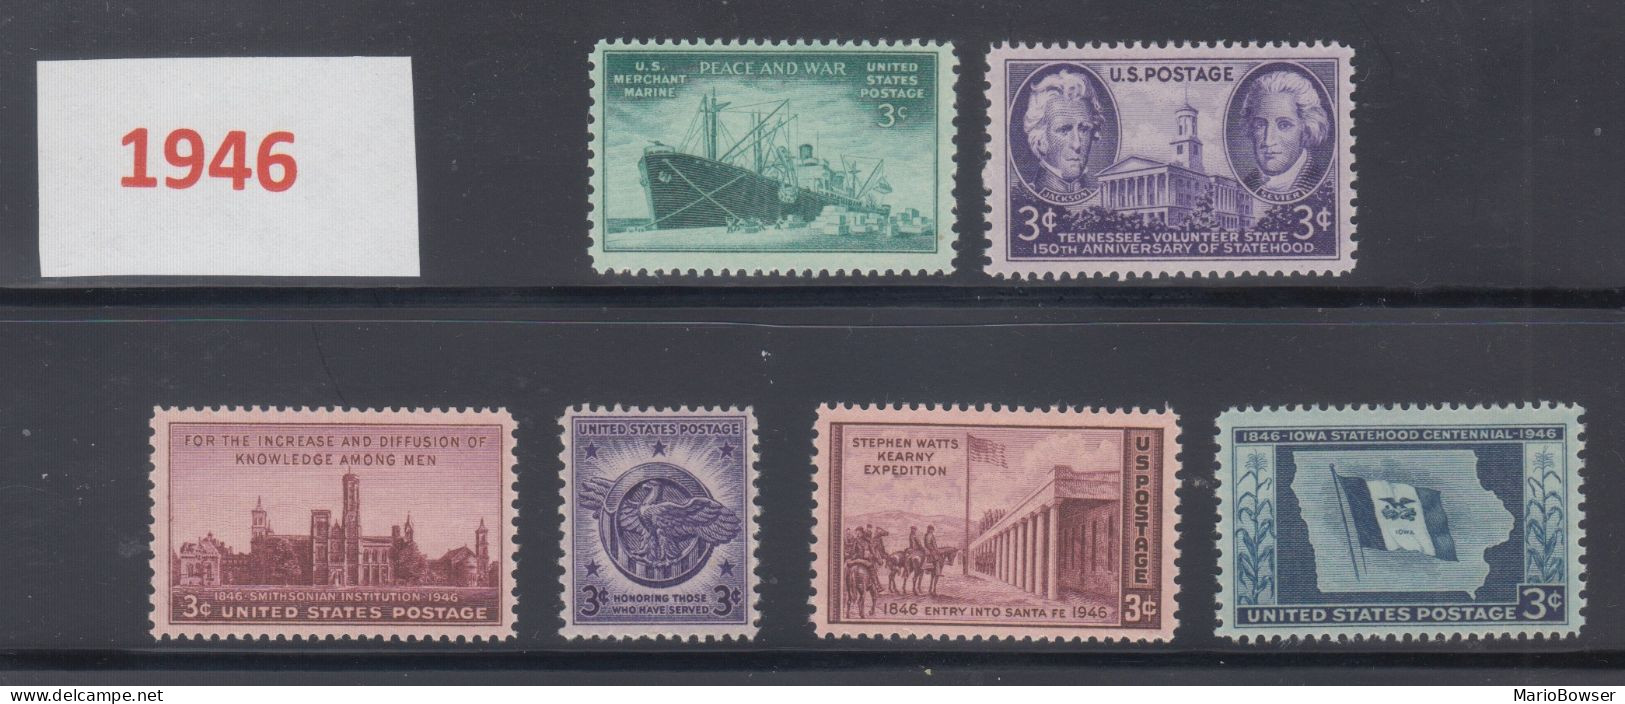 USA 1946 Full Year Commemorative MNH Stamps Set SC# 939-944 With 5 Stamps - Annate Complete